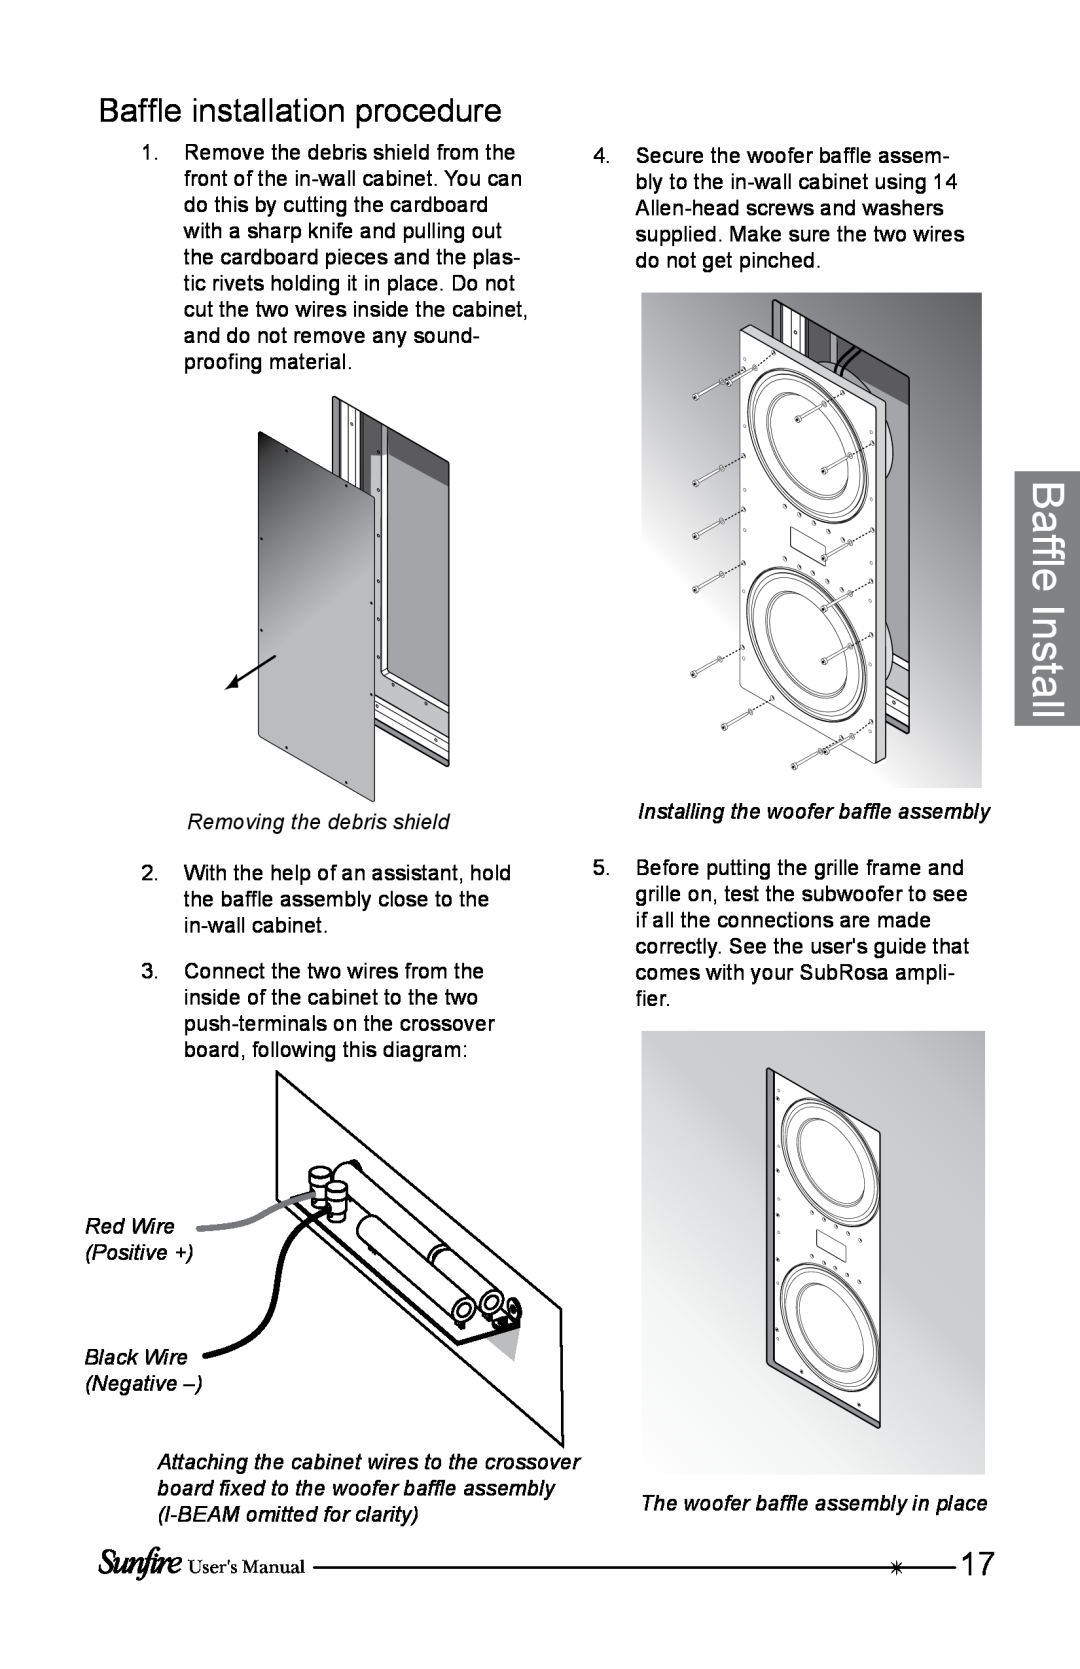 Sunfire SRS210W-B Baffle installation procedure, Baffle Install, Removing the debris shield, I-BEAMomitted for clarity 